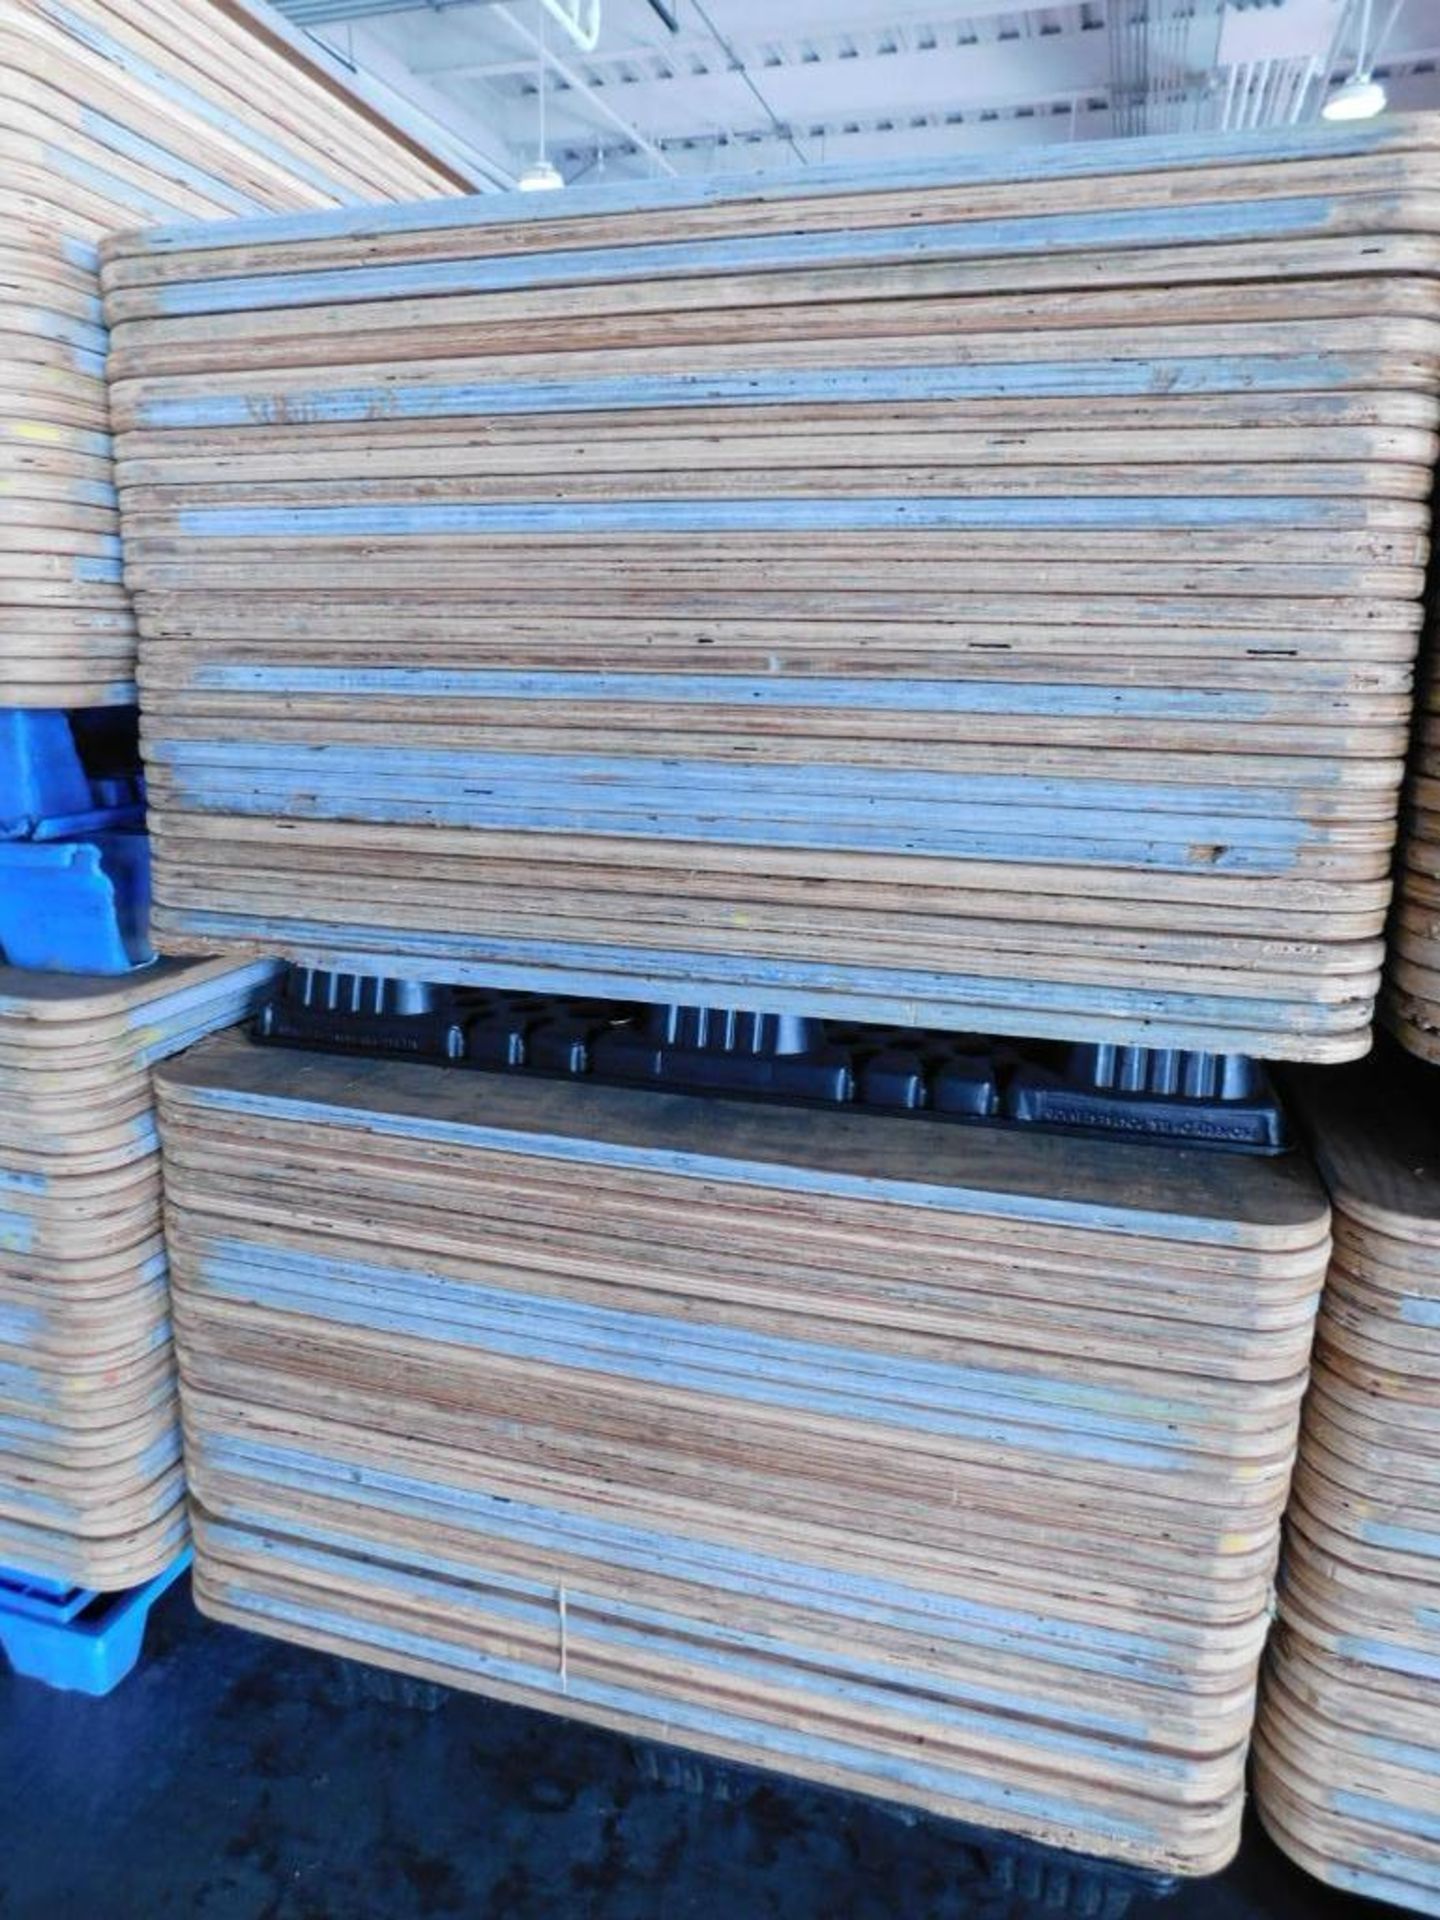 LOT: Large Quantity of 50" x 50" Wood Paper Roll Pallets on (12) Plastic Pallets (LOCATION: IN MAIL - Image 5 of 7